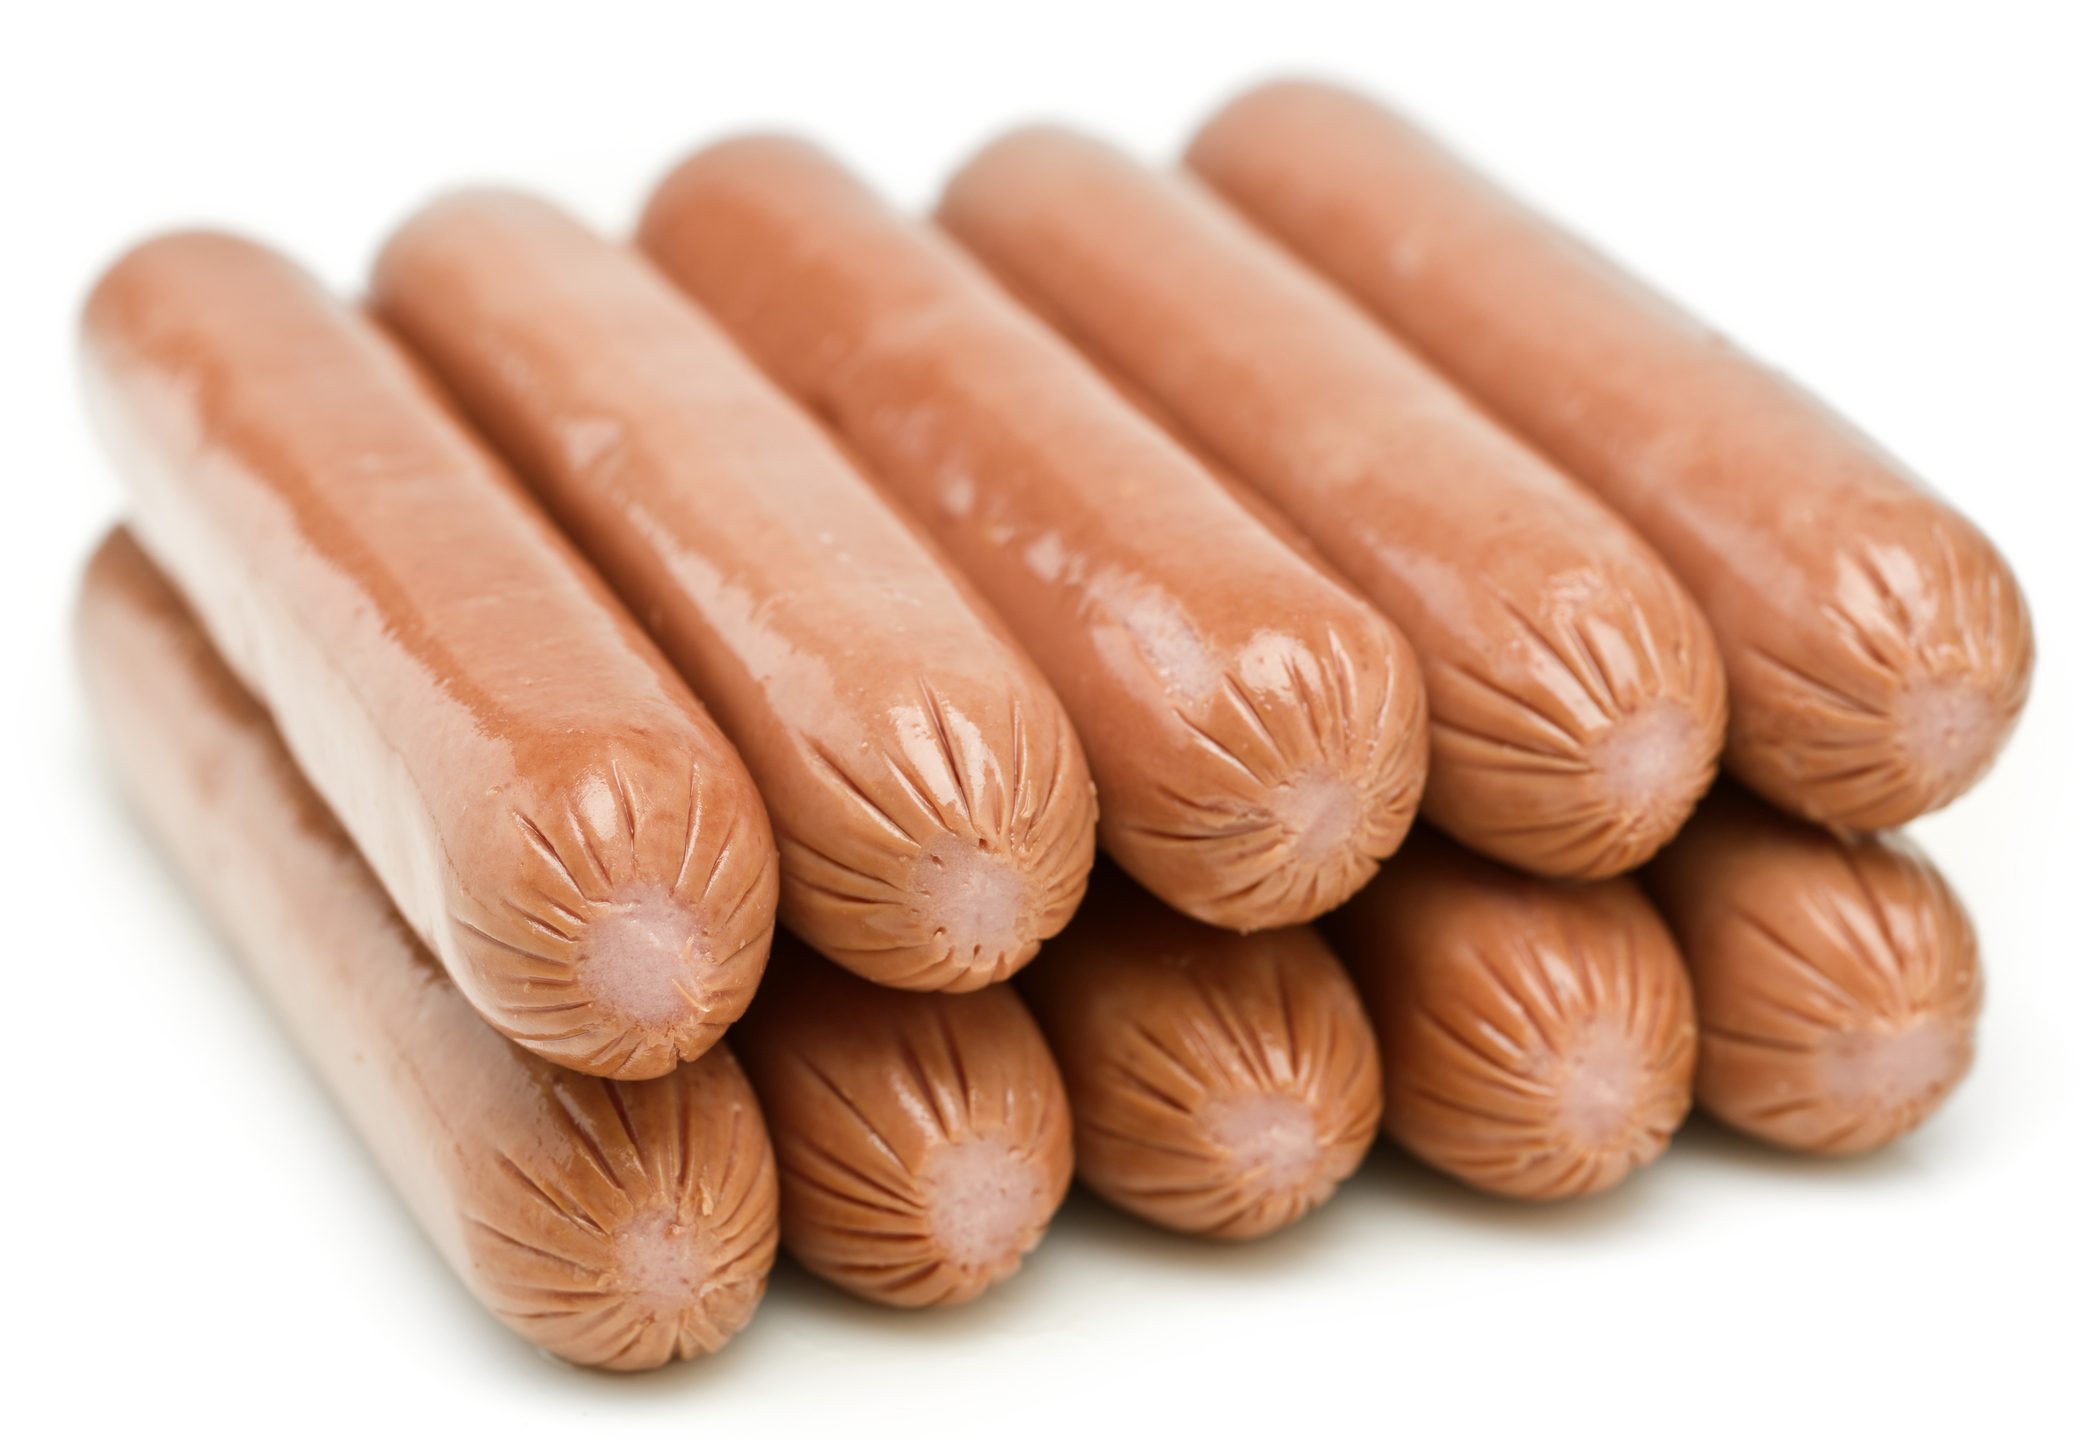 How To Store Hot Dogs After Opening